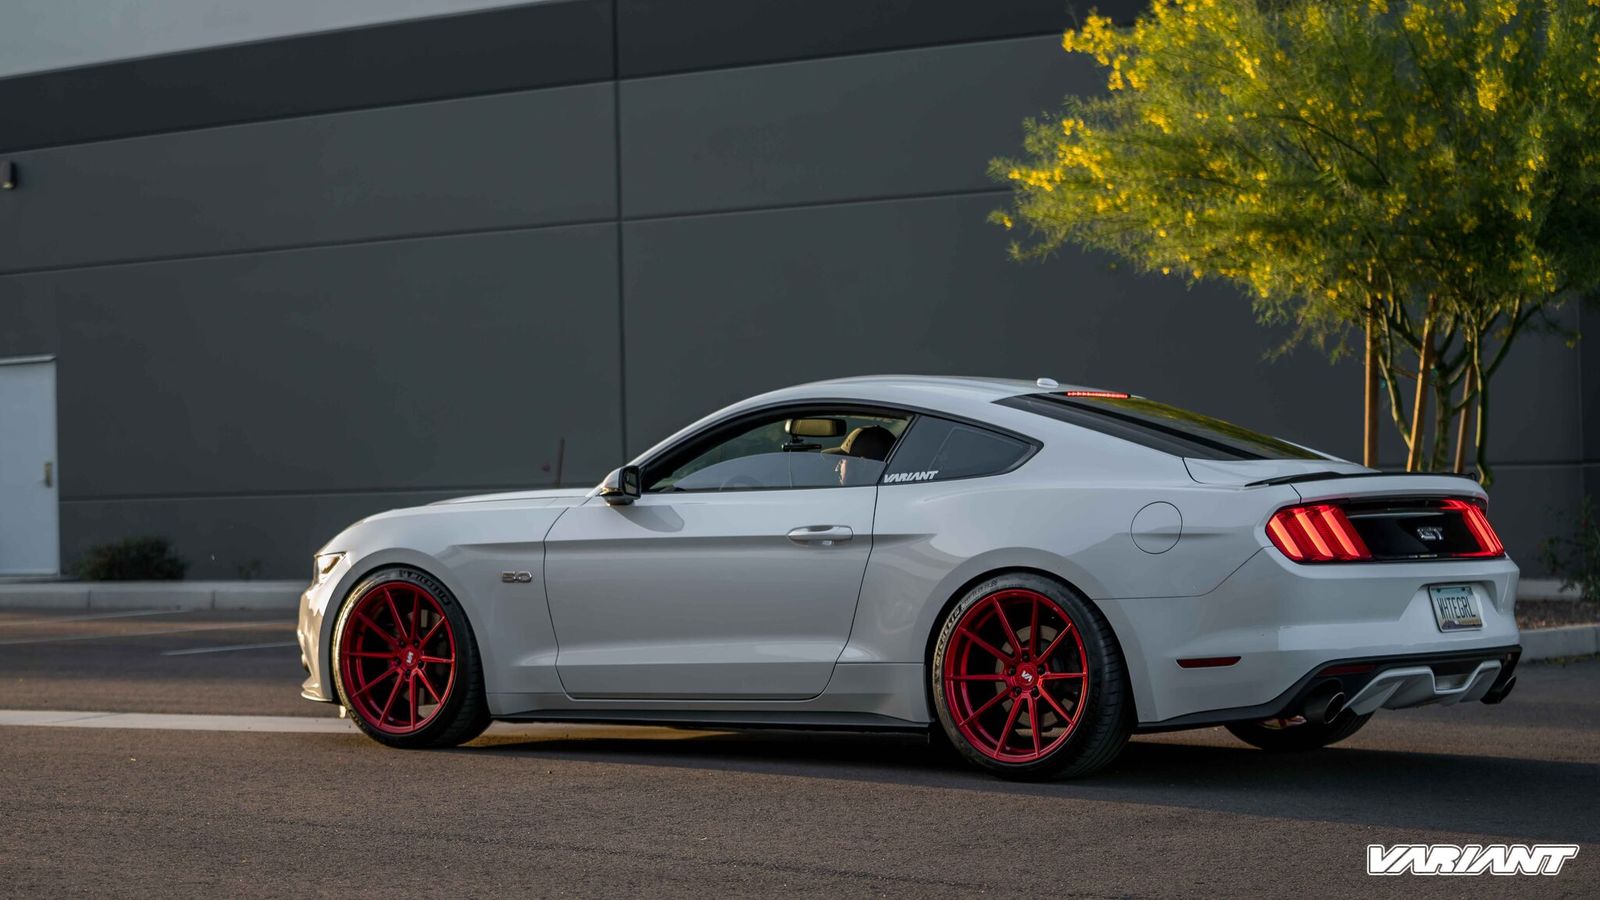 exofrd-white-ford-mustang-gt-s550-variant-argon-candy-apple-red-concave-wheels.jpg